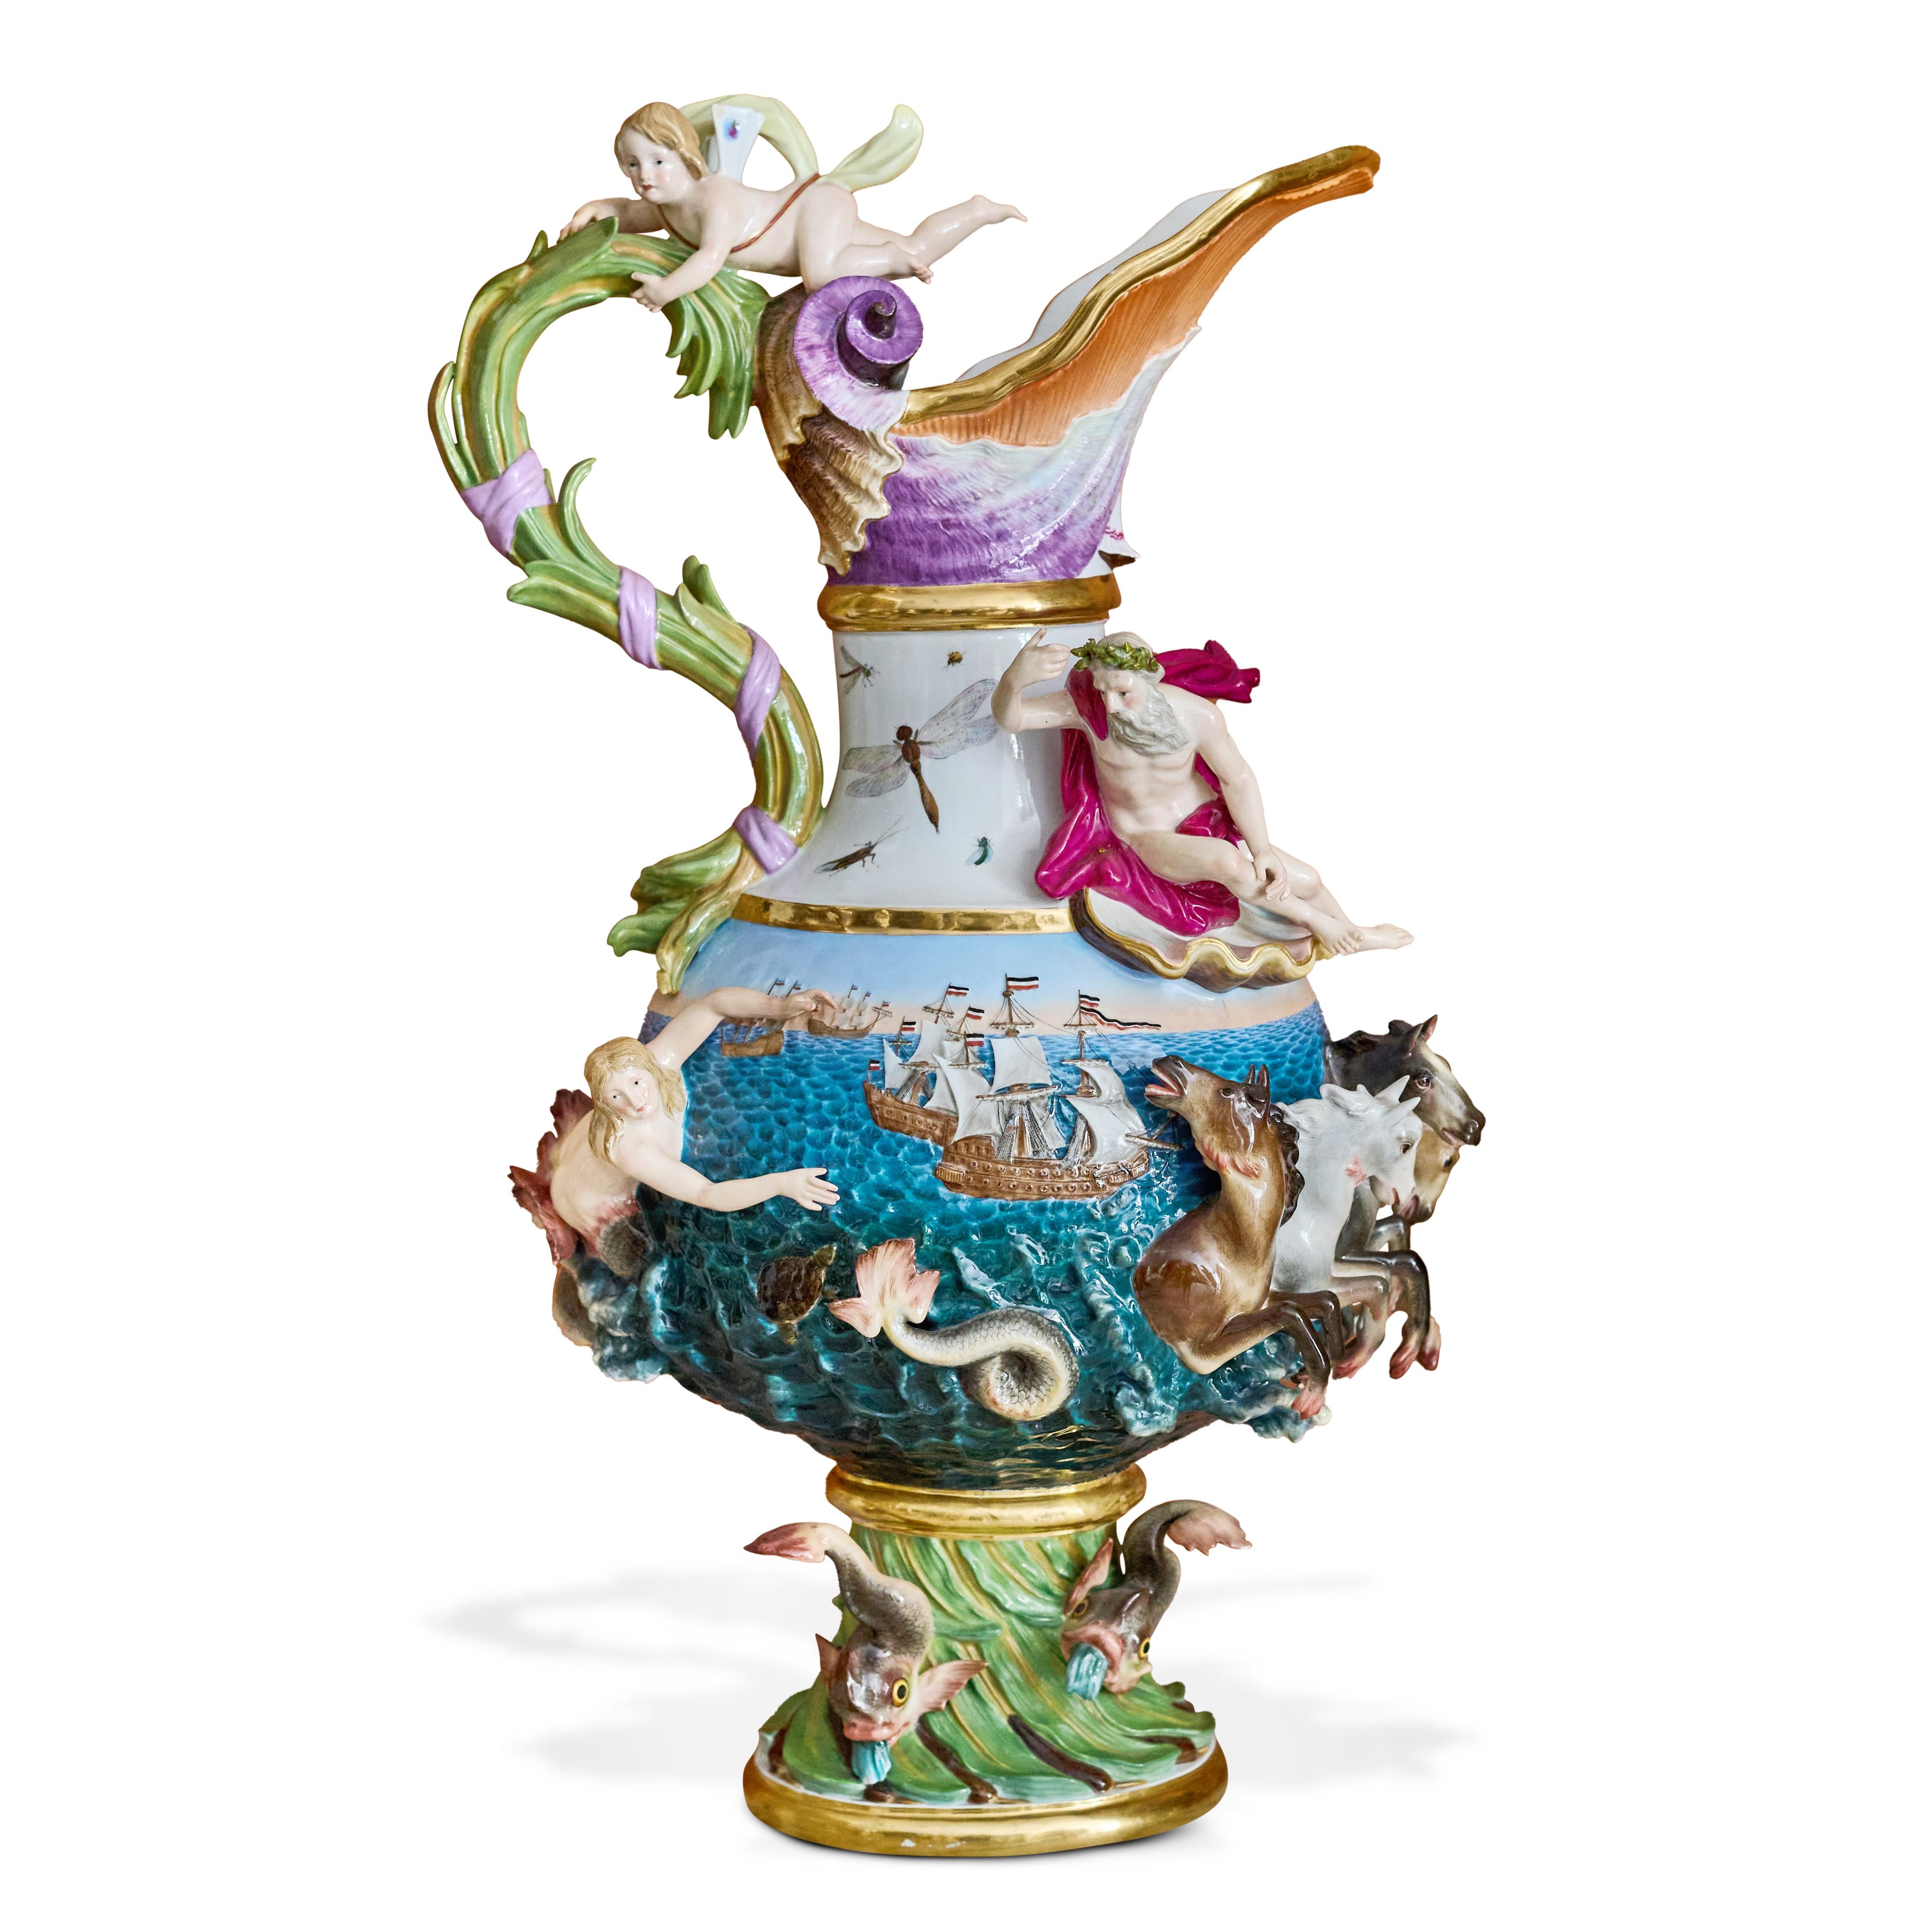 This extremely important set of Meissen ewers represents the Four Elements: Earth, Air, Water and Fire. Impressive in both size and artistry, they are among the most famous and spectacular examples of Meissen porcelain ever made. Each vase is an